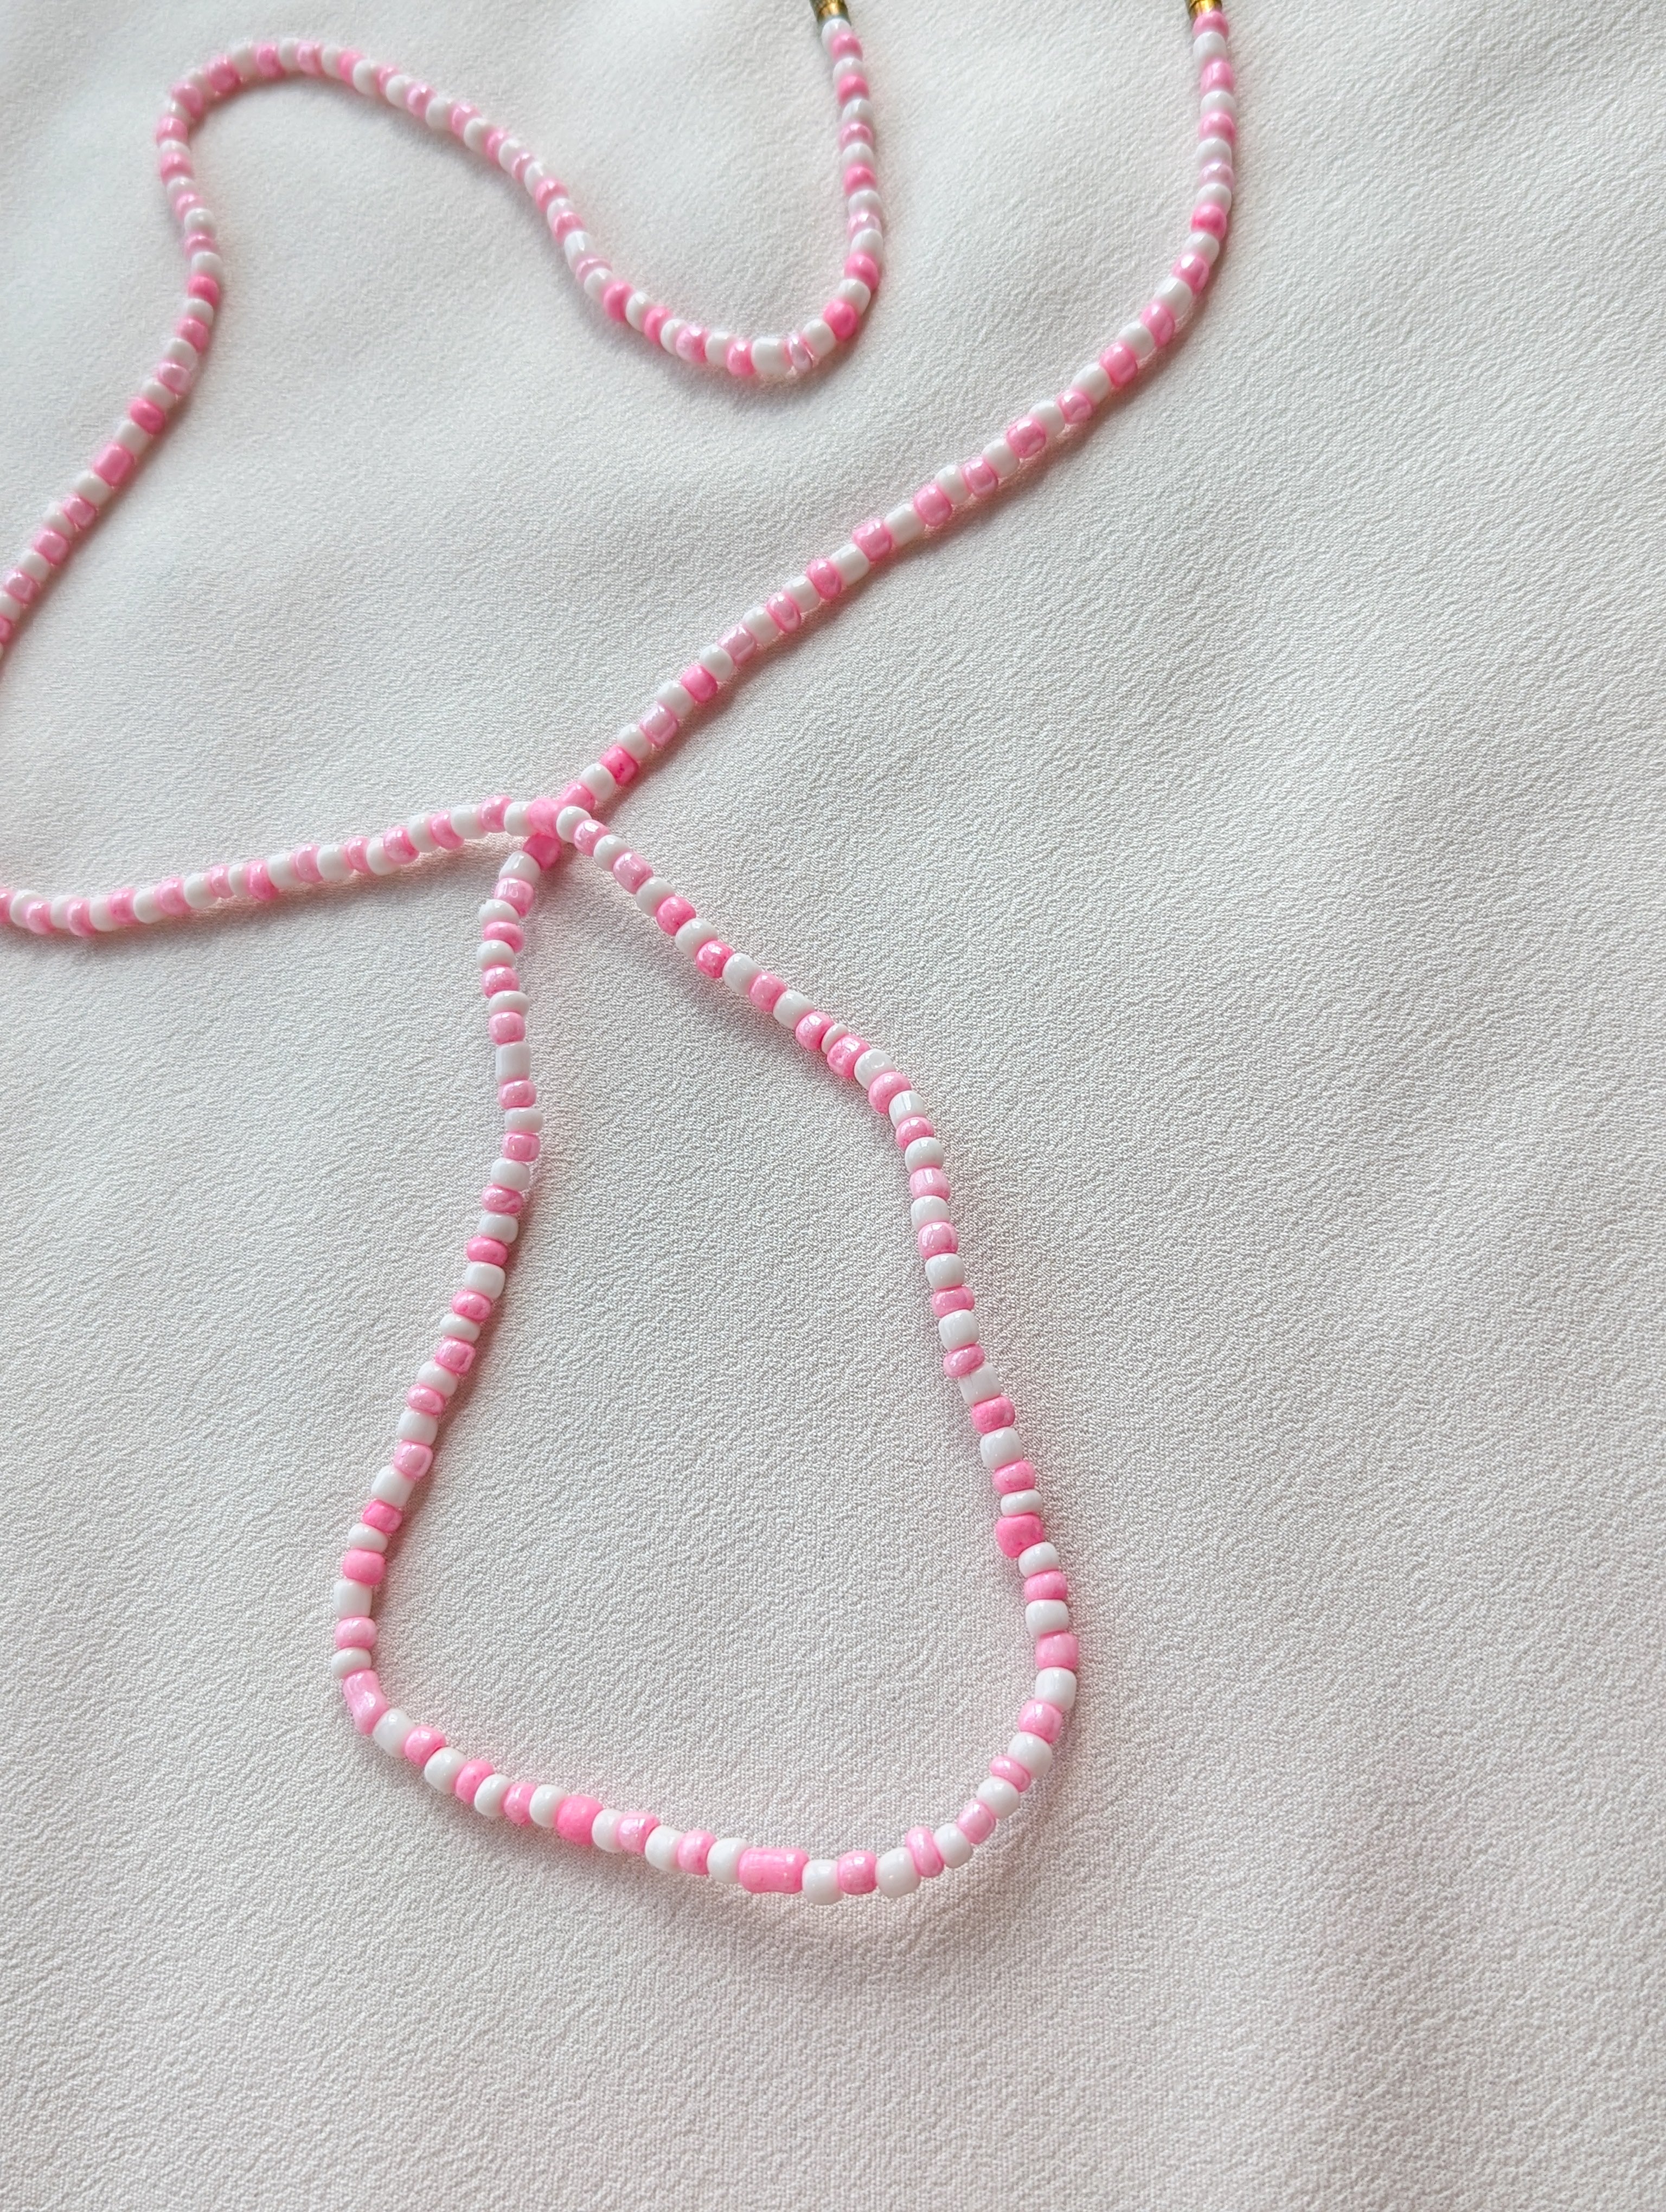 [THE TWO] Belly Chain: White/Pink [Large Beads]